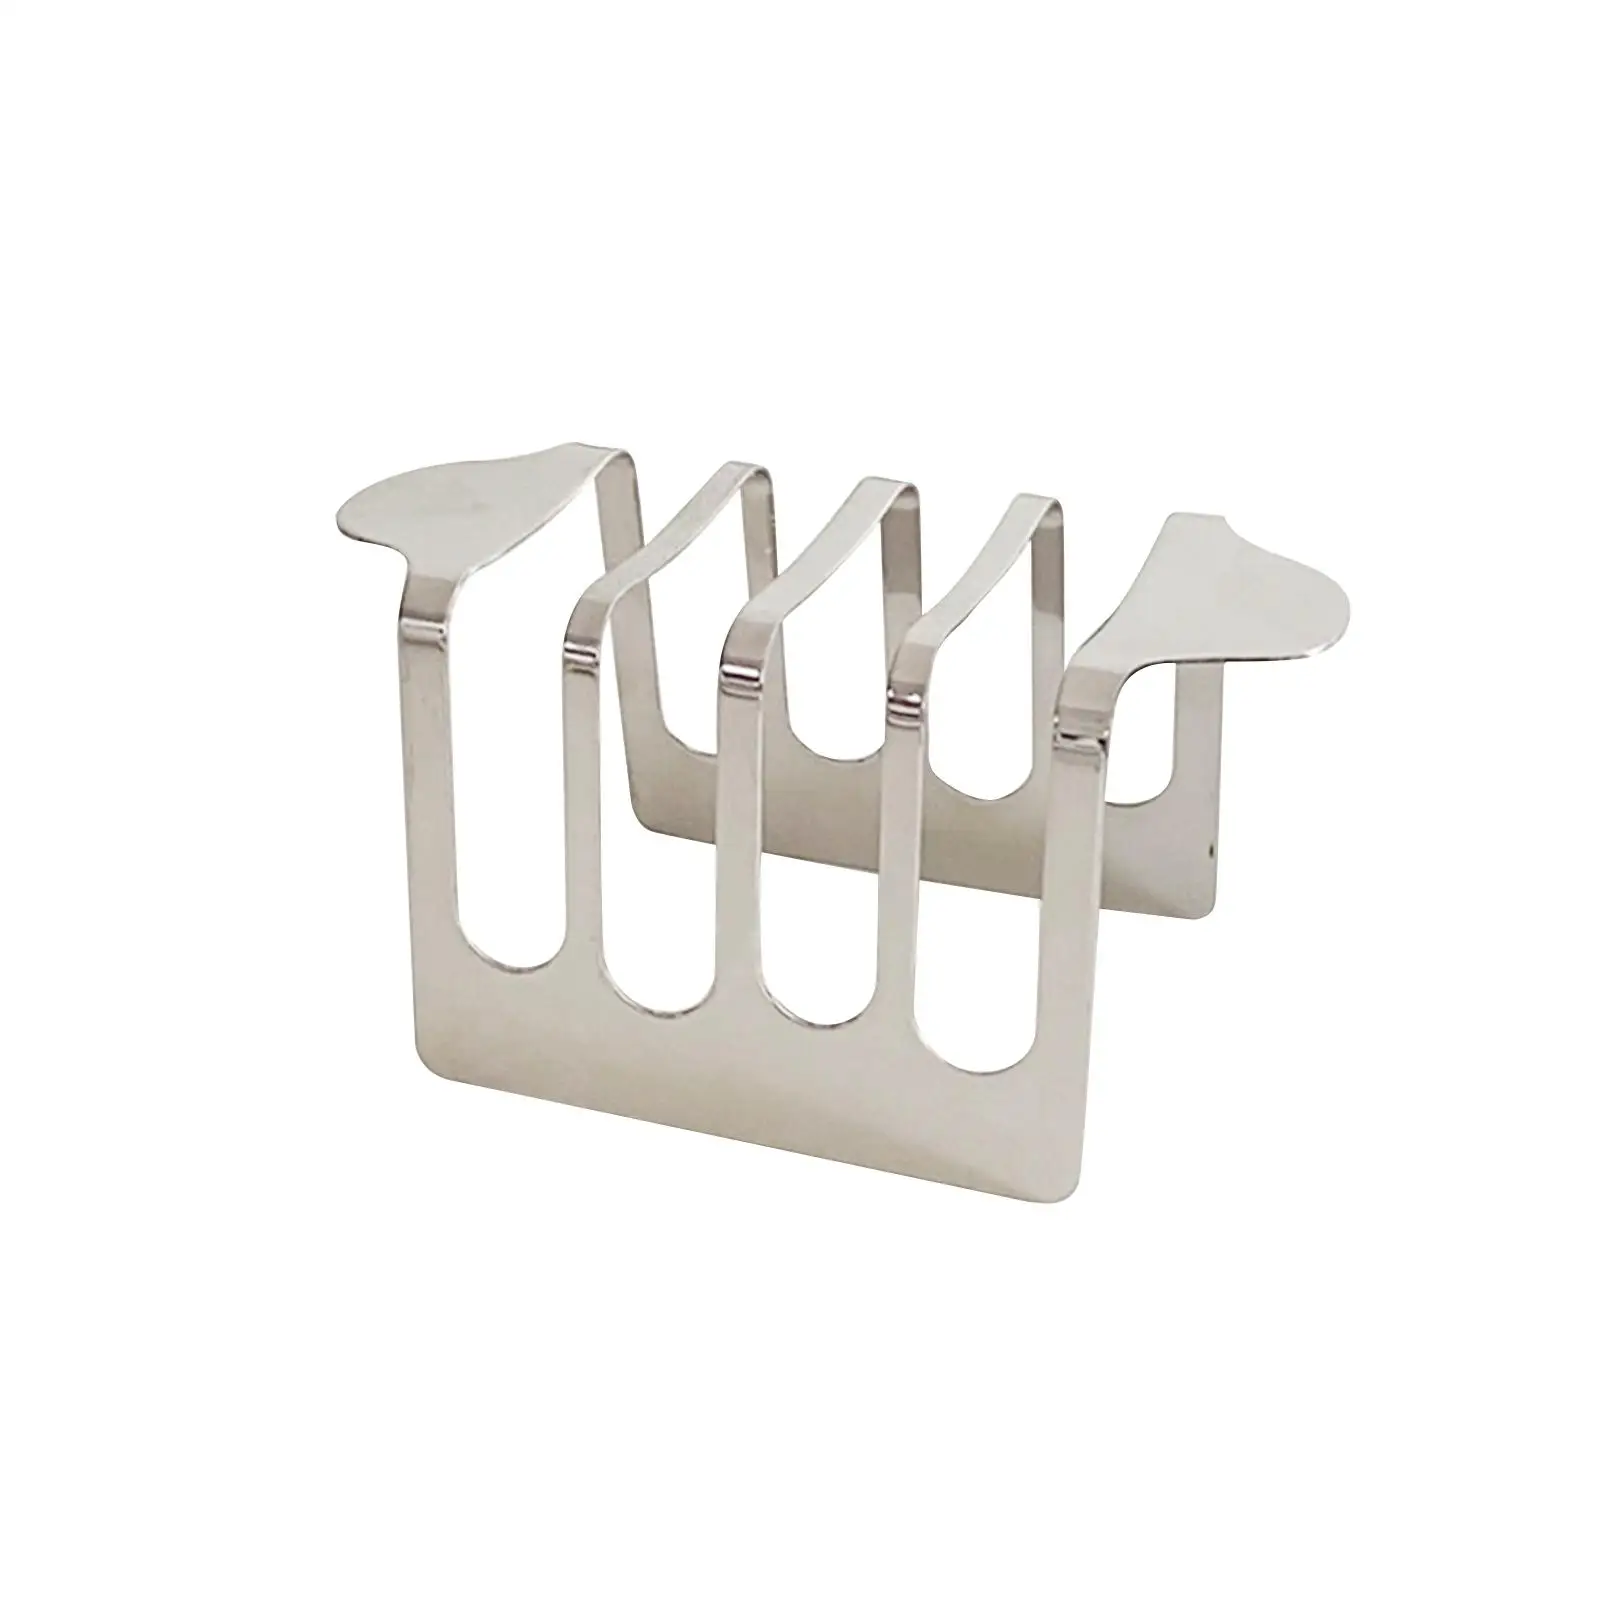 Toast Rack Bread Holder Stainless Steel Bread Rack Show Tool Bread Display Stand for Bread Hotel Pancake Restaurant Oven